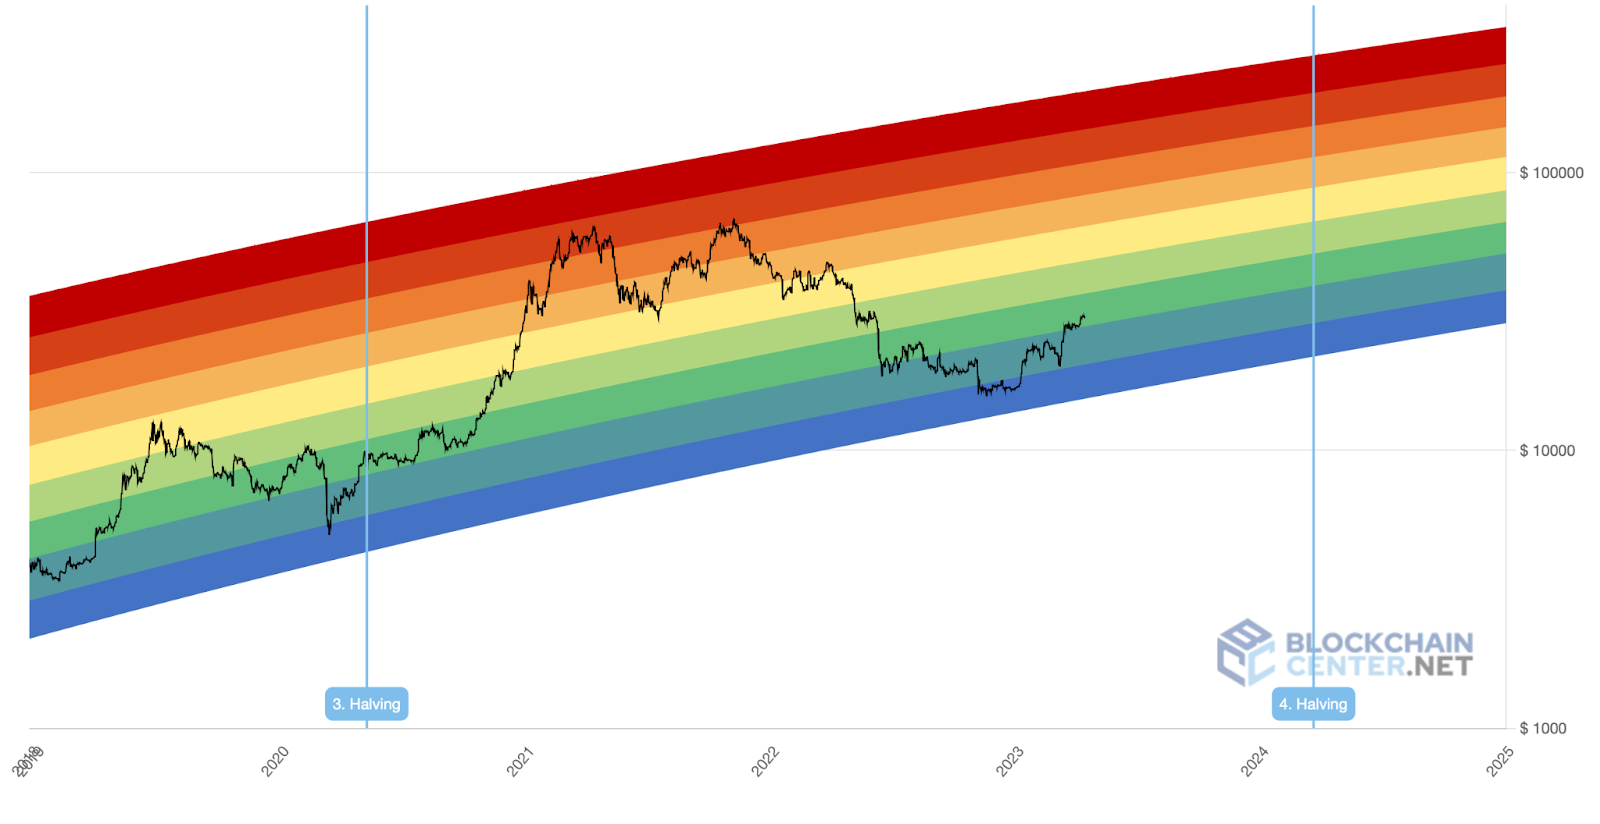 Bitcoin Rainbow chart sets BTC price for end of 